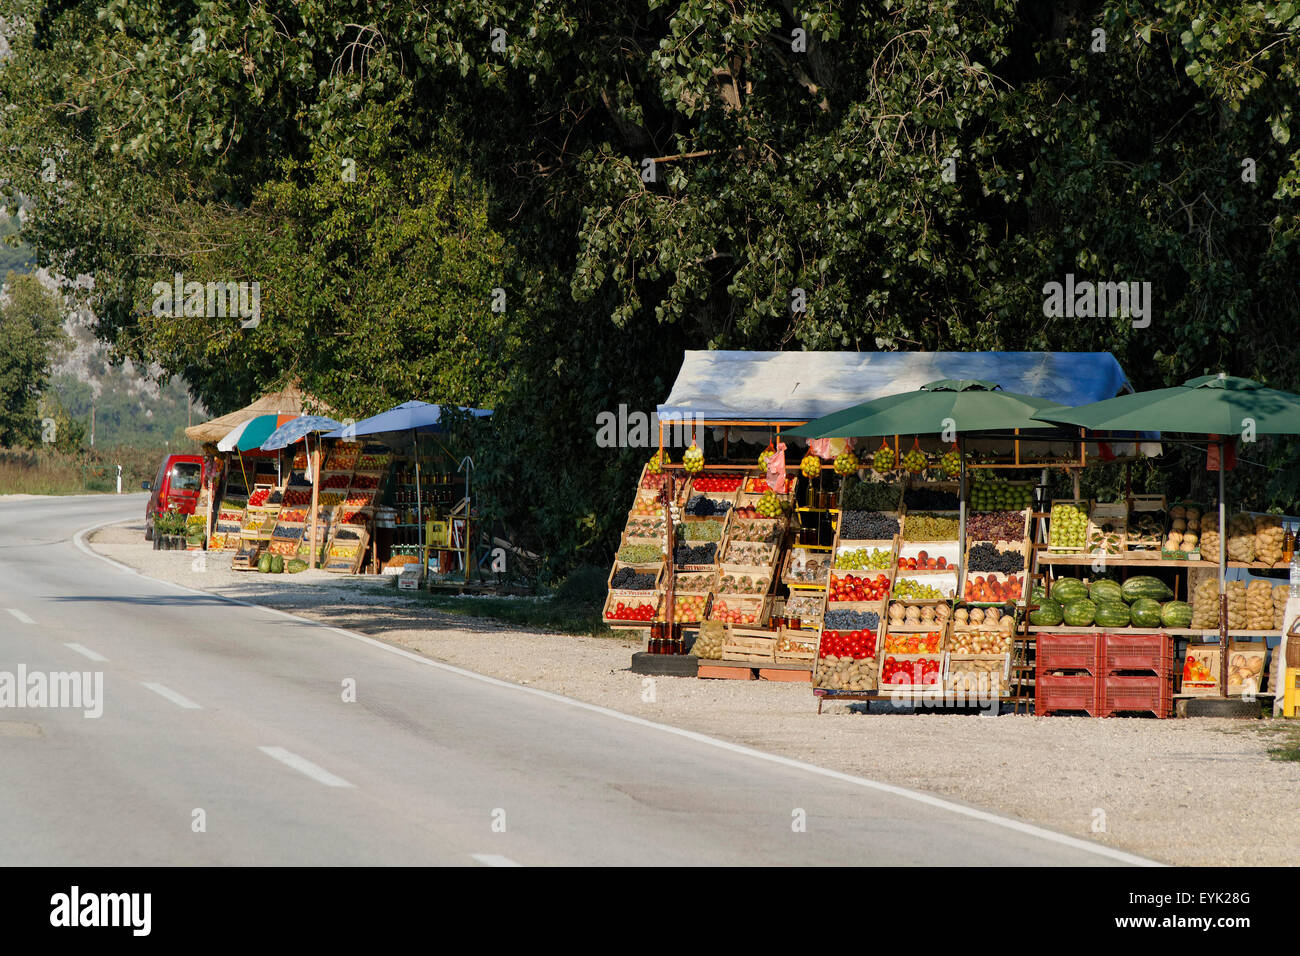 Fruits and vegetables market stall by a road, Croatia Stock Photo